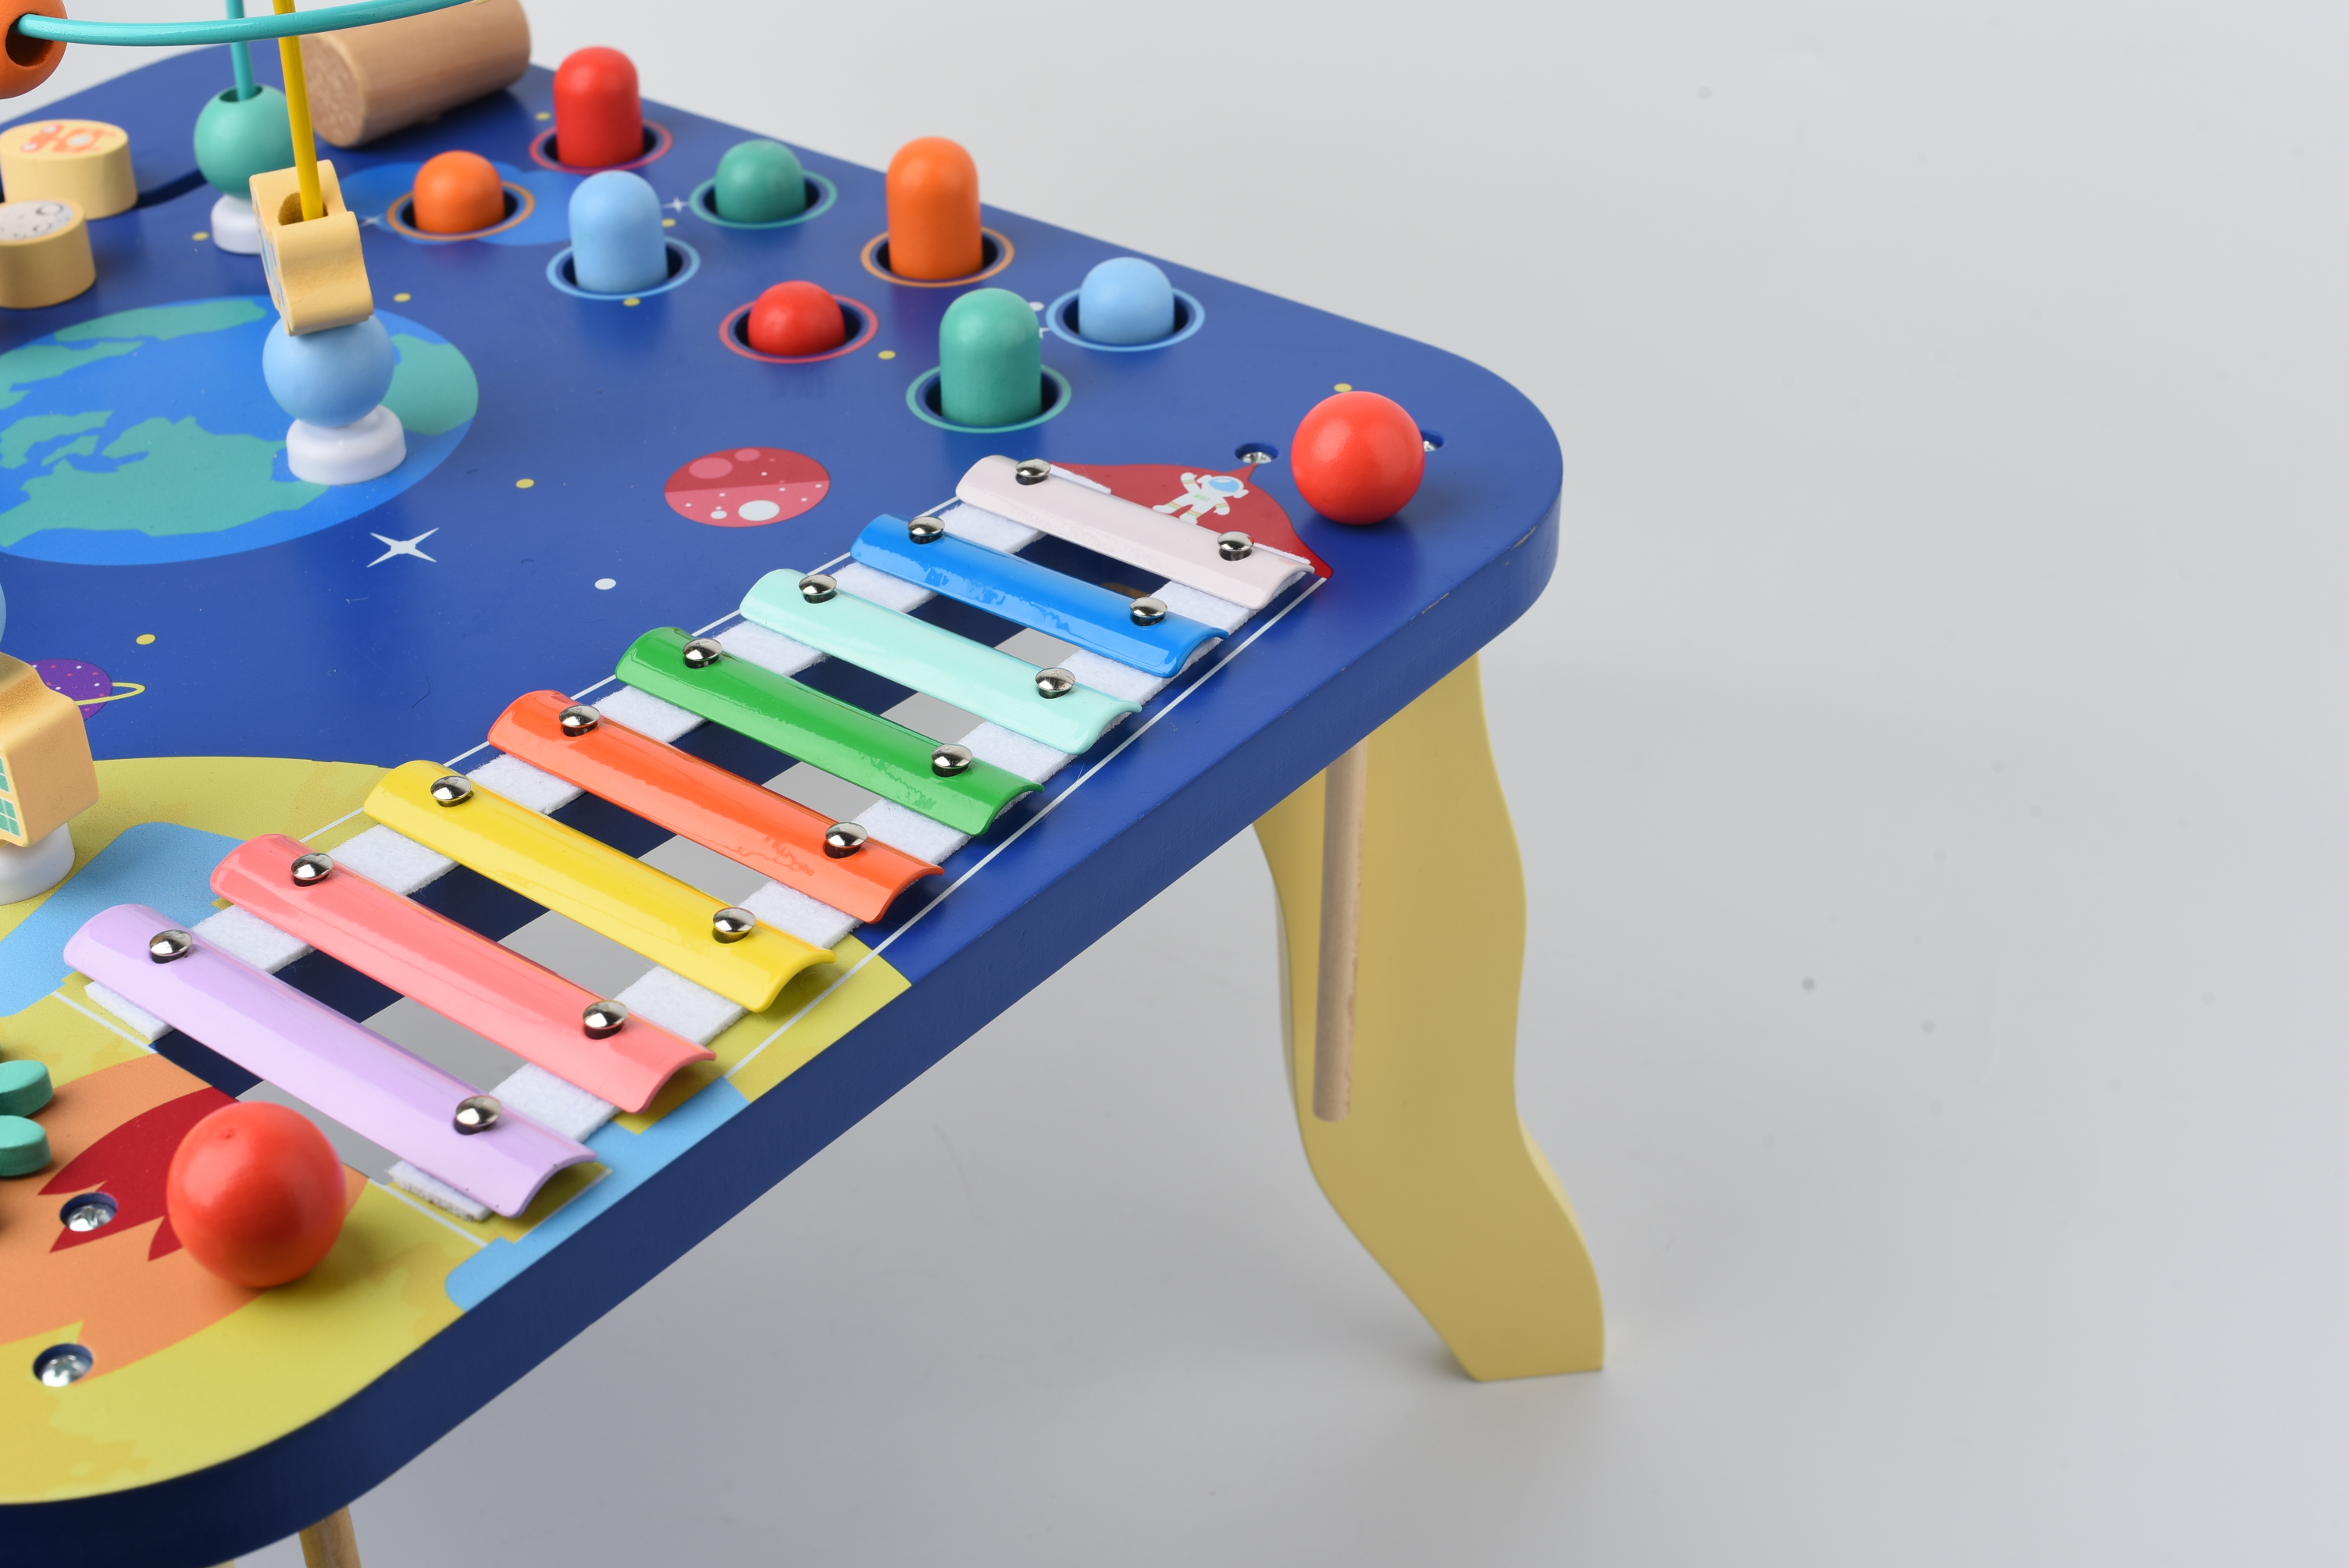 Wooden toy Five one multi-functional game table